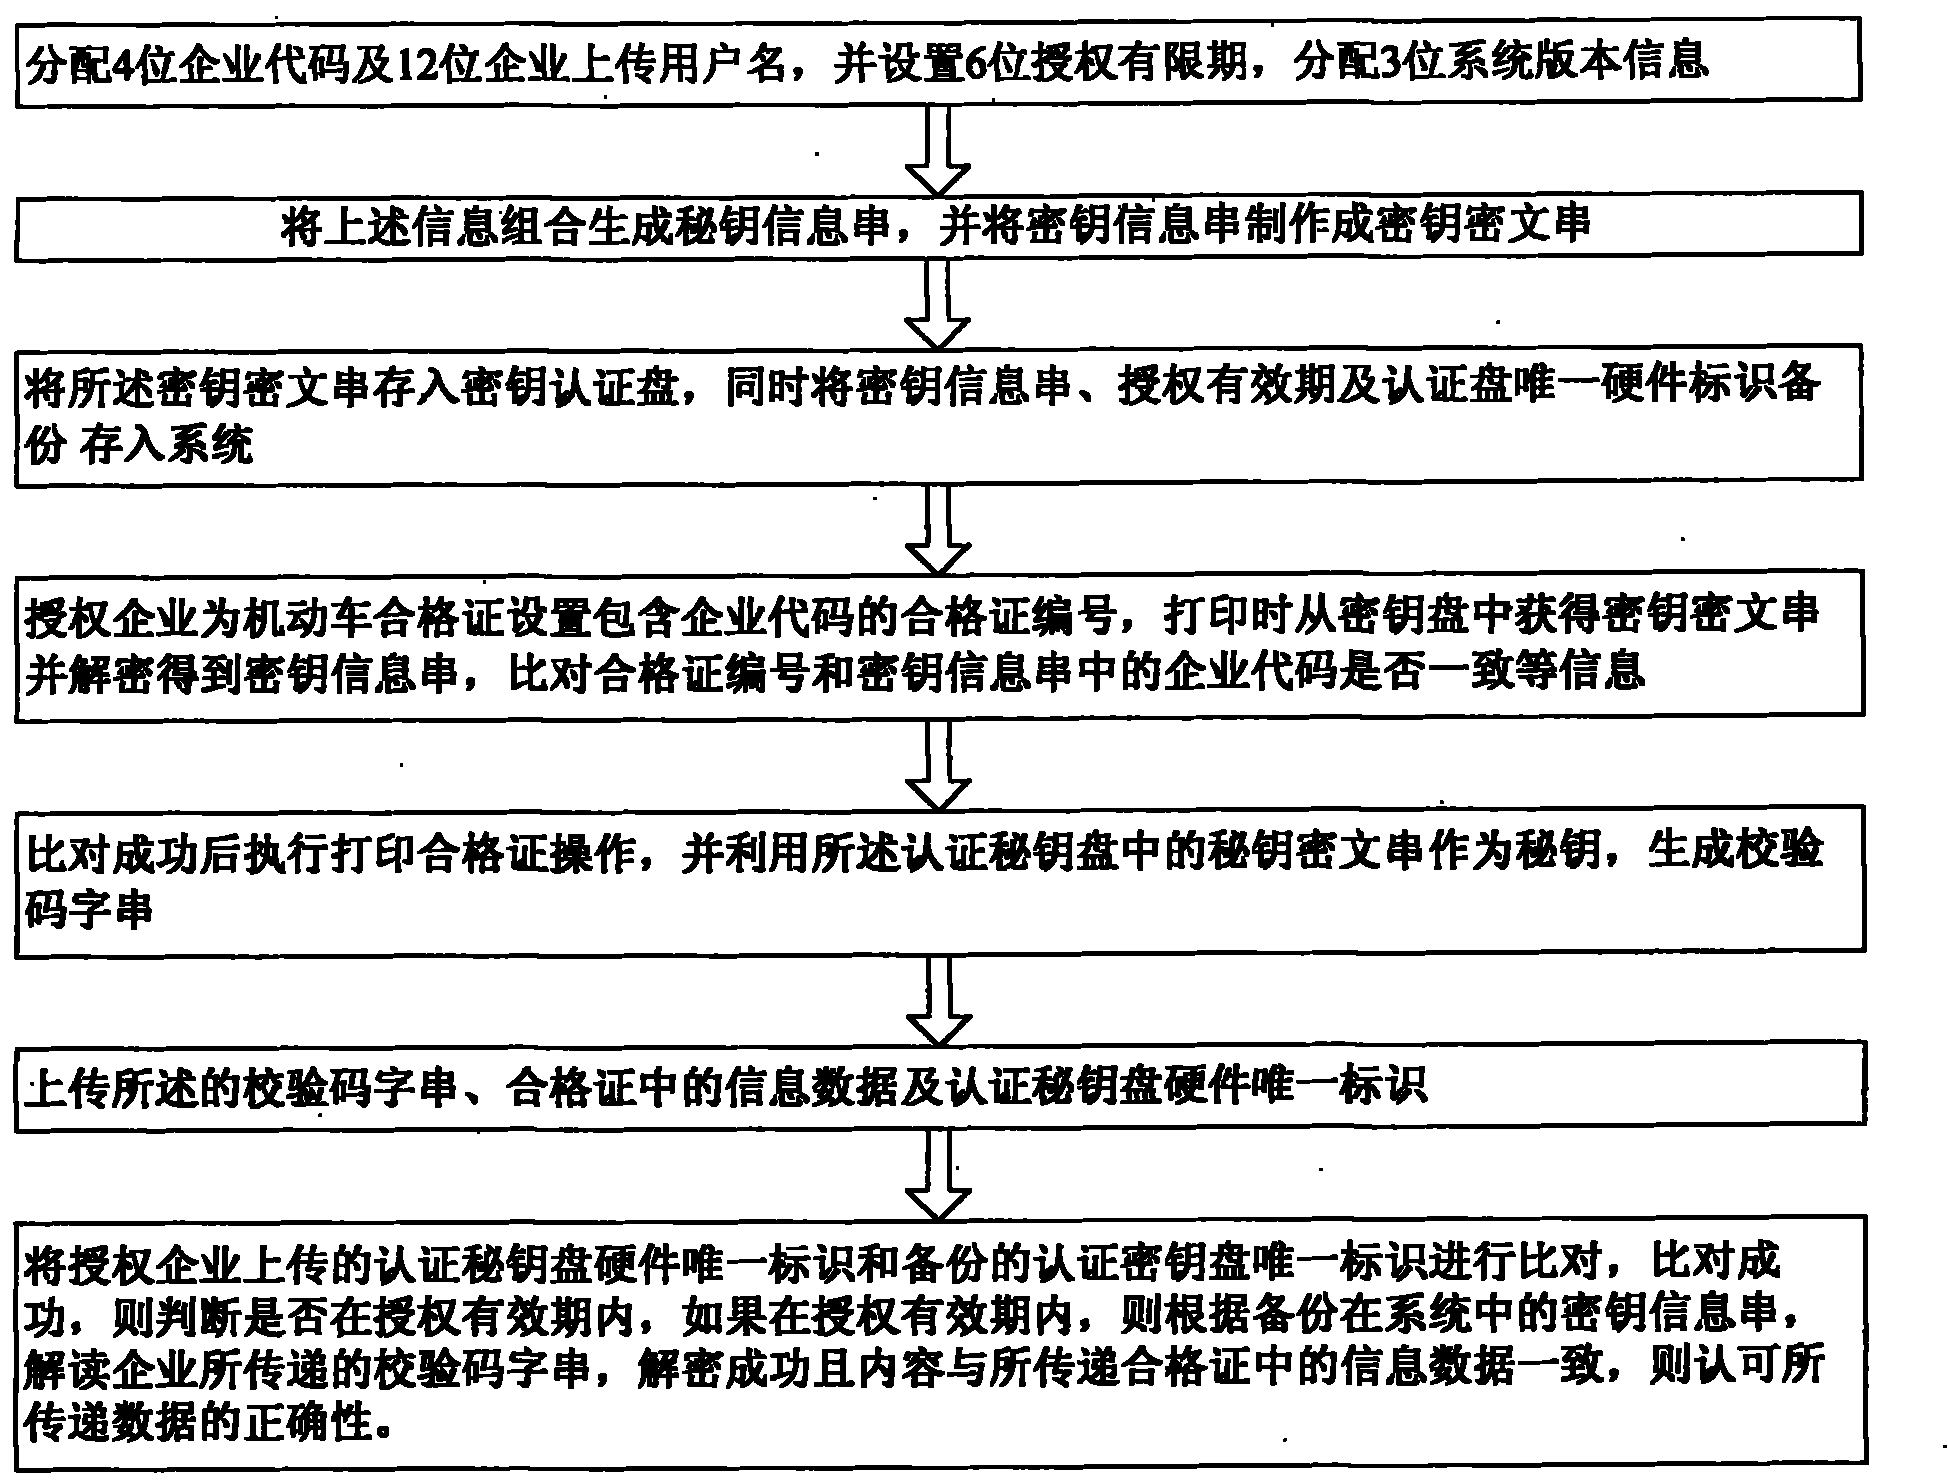 Automotive vehicle certificate printing and data uploading authorization control method and system